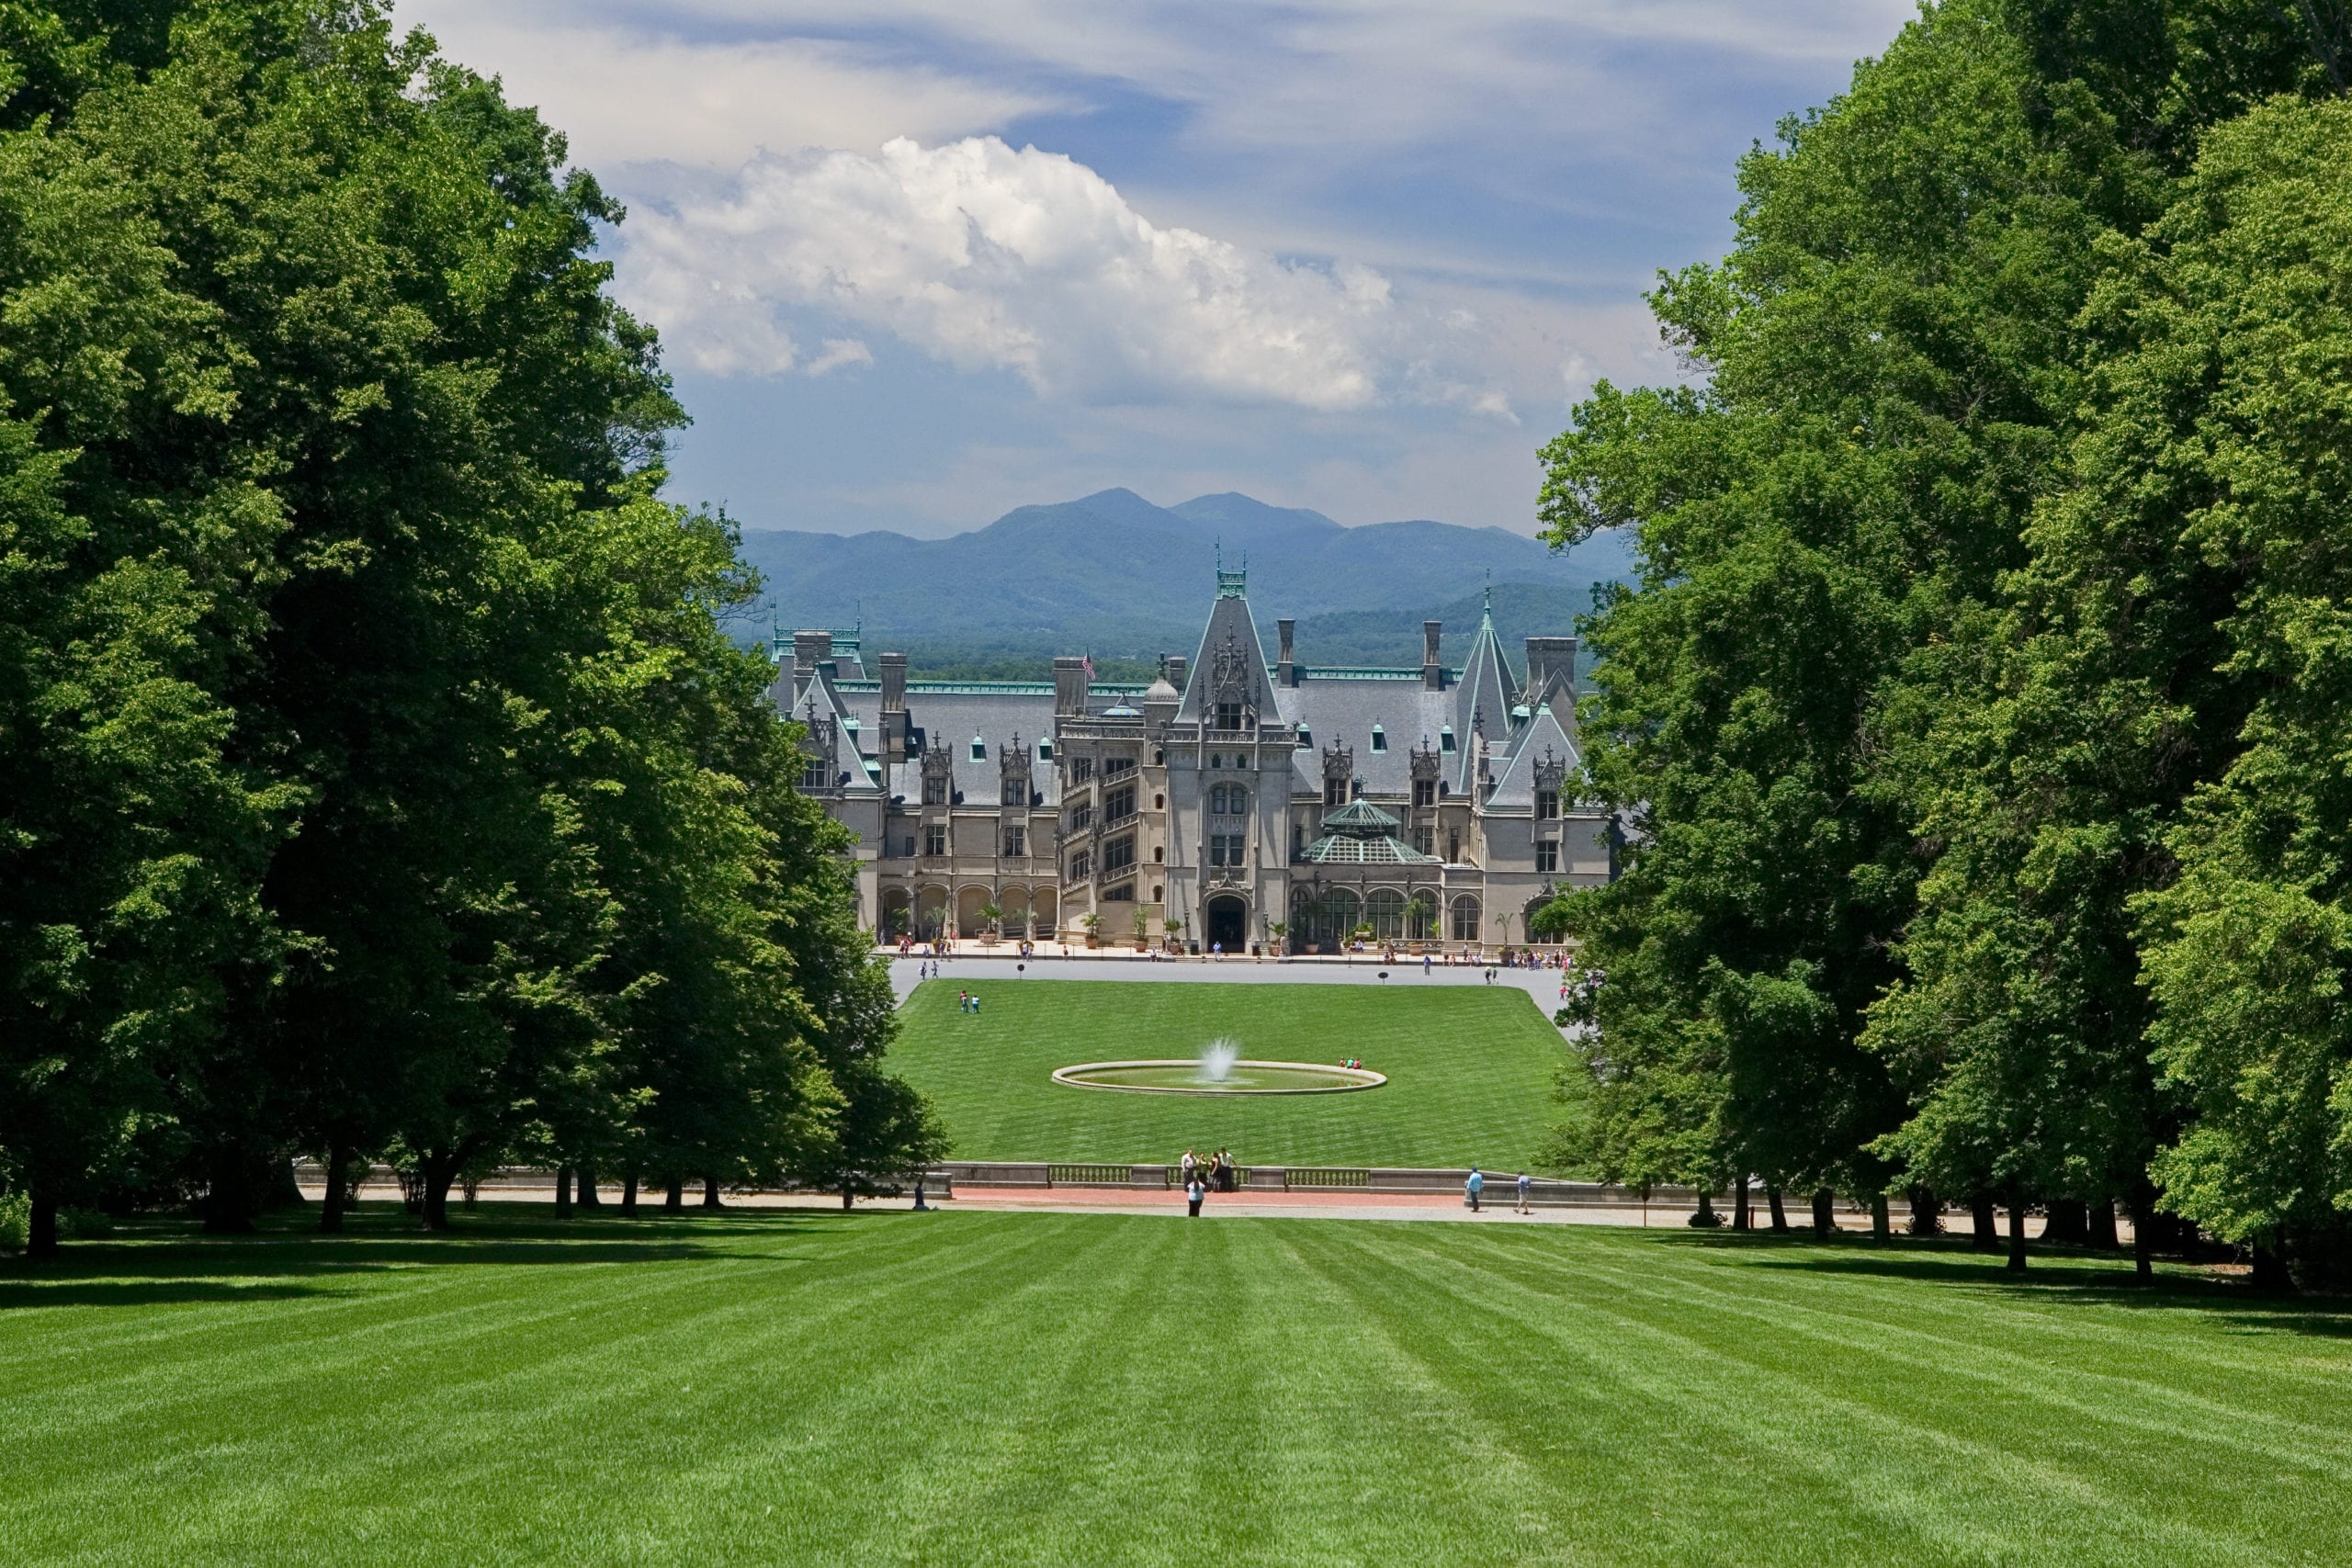 Biltmore Estate: A Must See in Asheville, NC